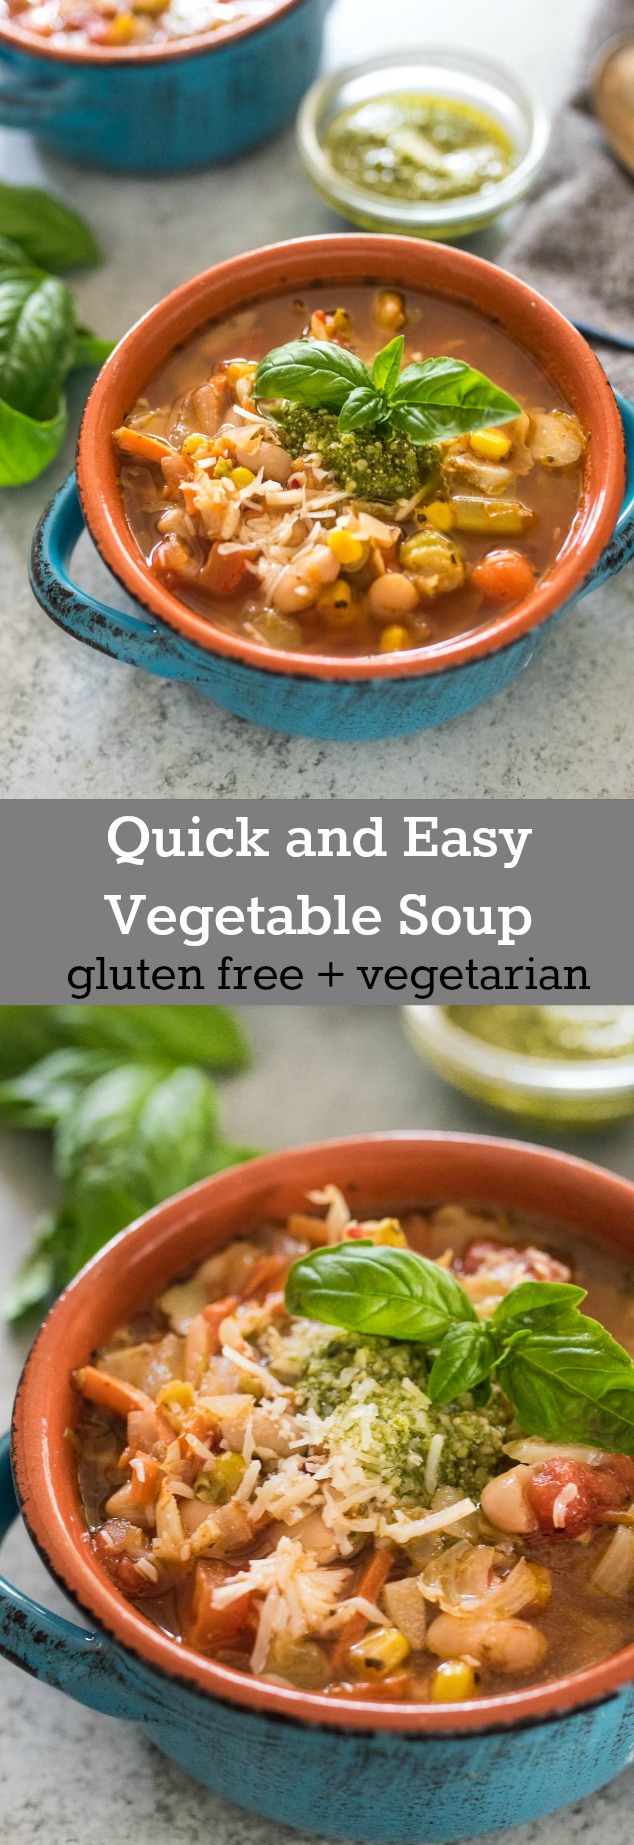 Quick and Easy Vegetable Soup with Pesto will nourish you from the inside out and will use up all those last bits of vegetables reducing waste in your kitchen.